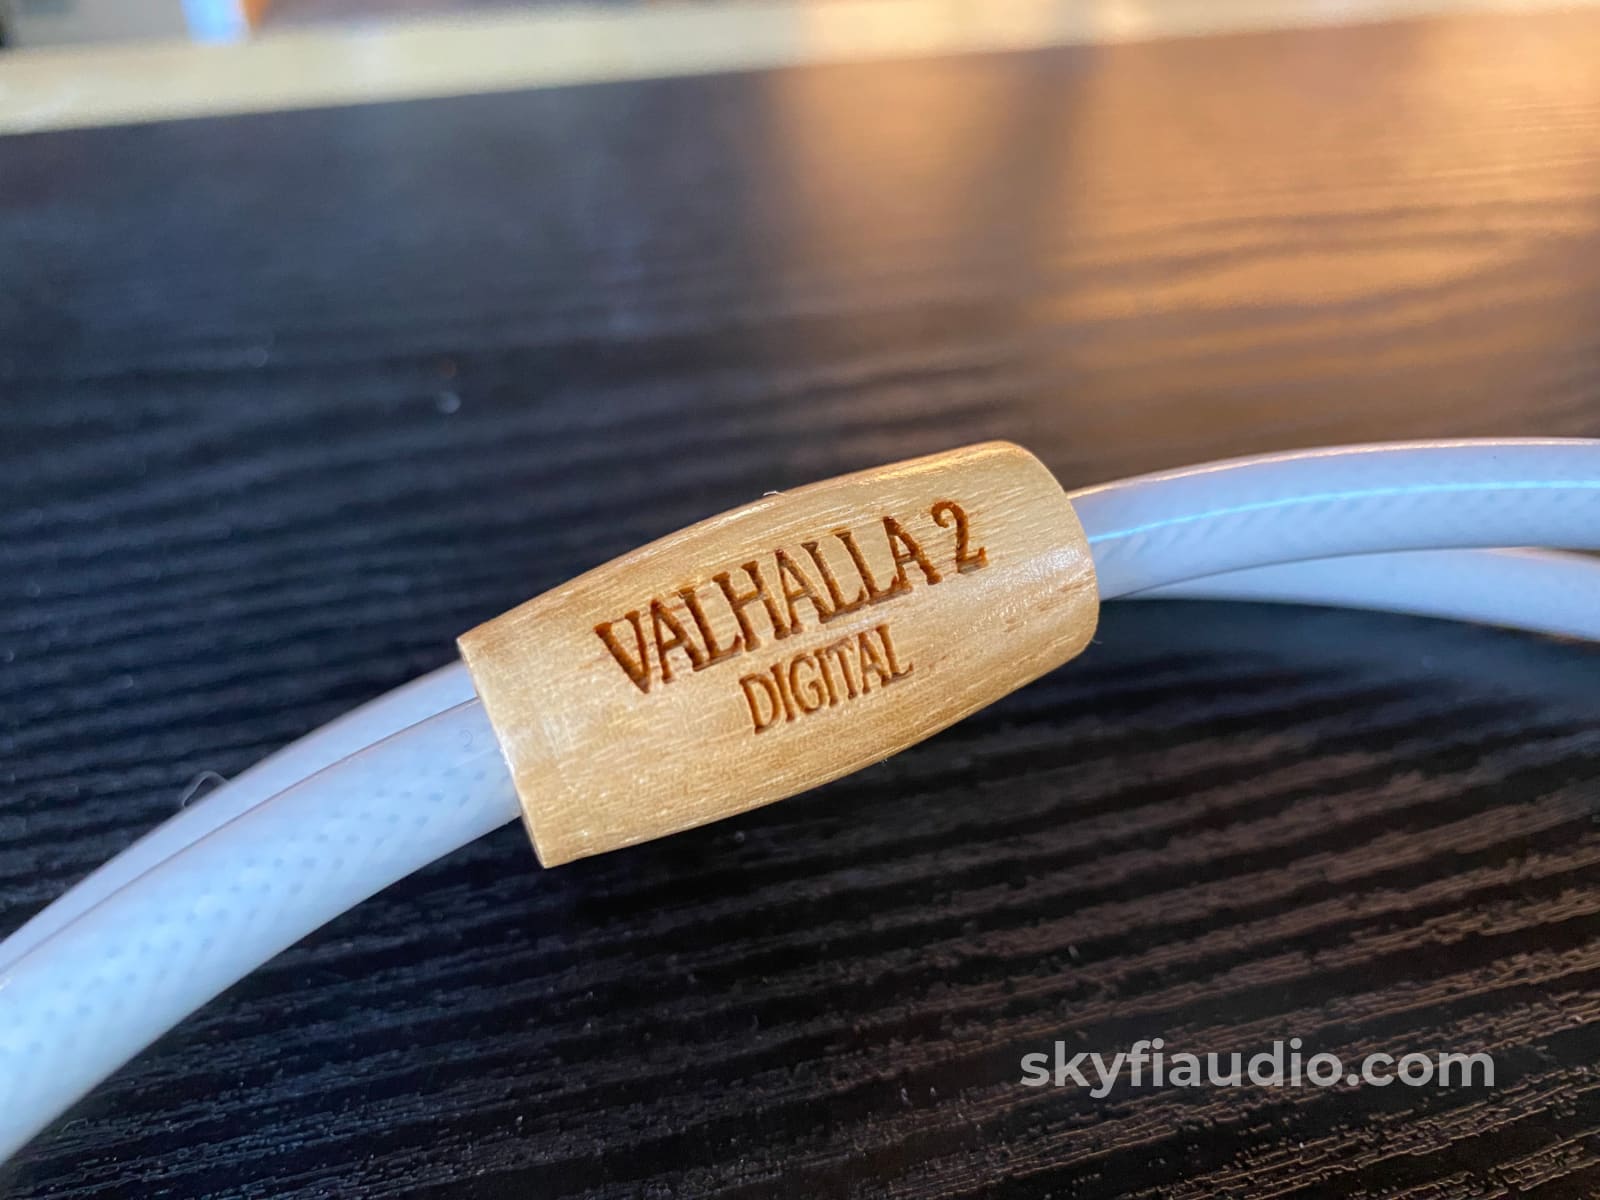 Nordost Valhalla 2 Coaxial Digital Cable W/Bnc Terminations - 1.5M Cables